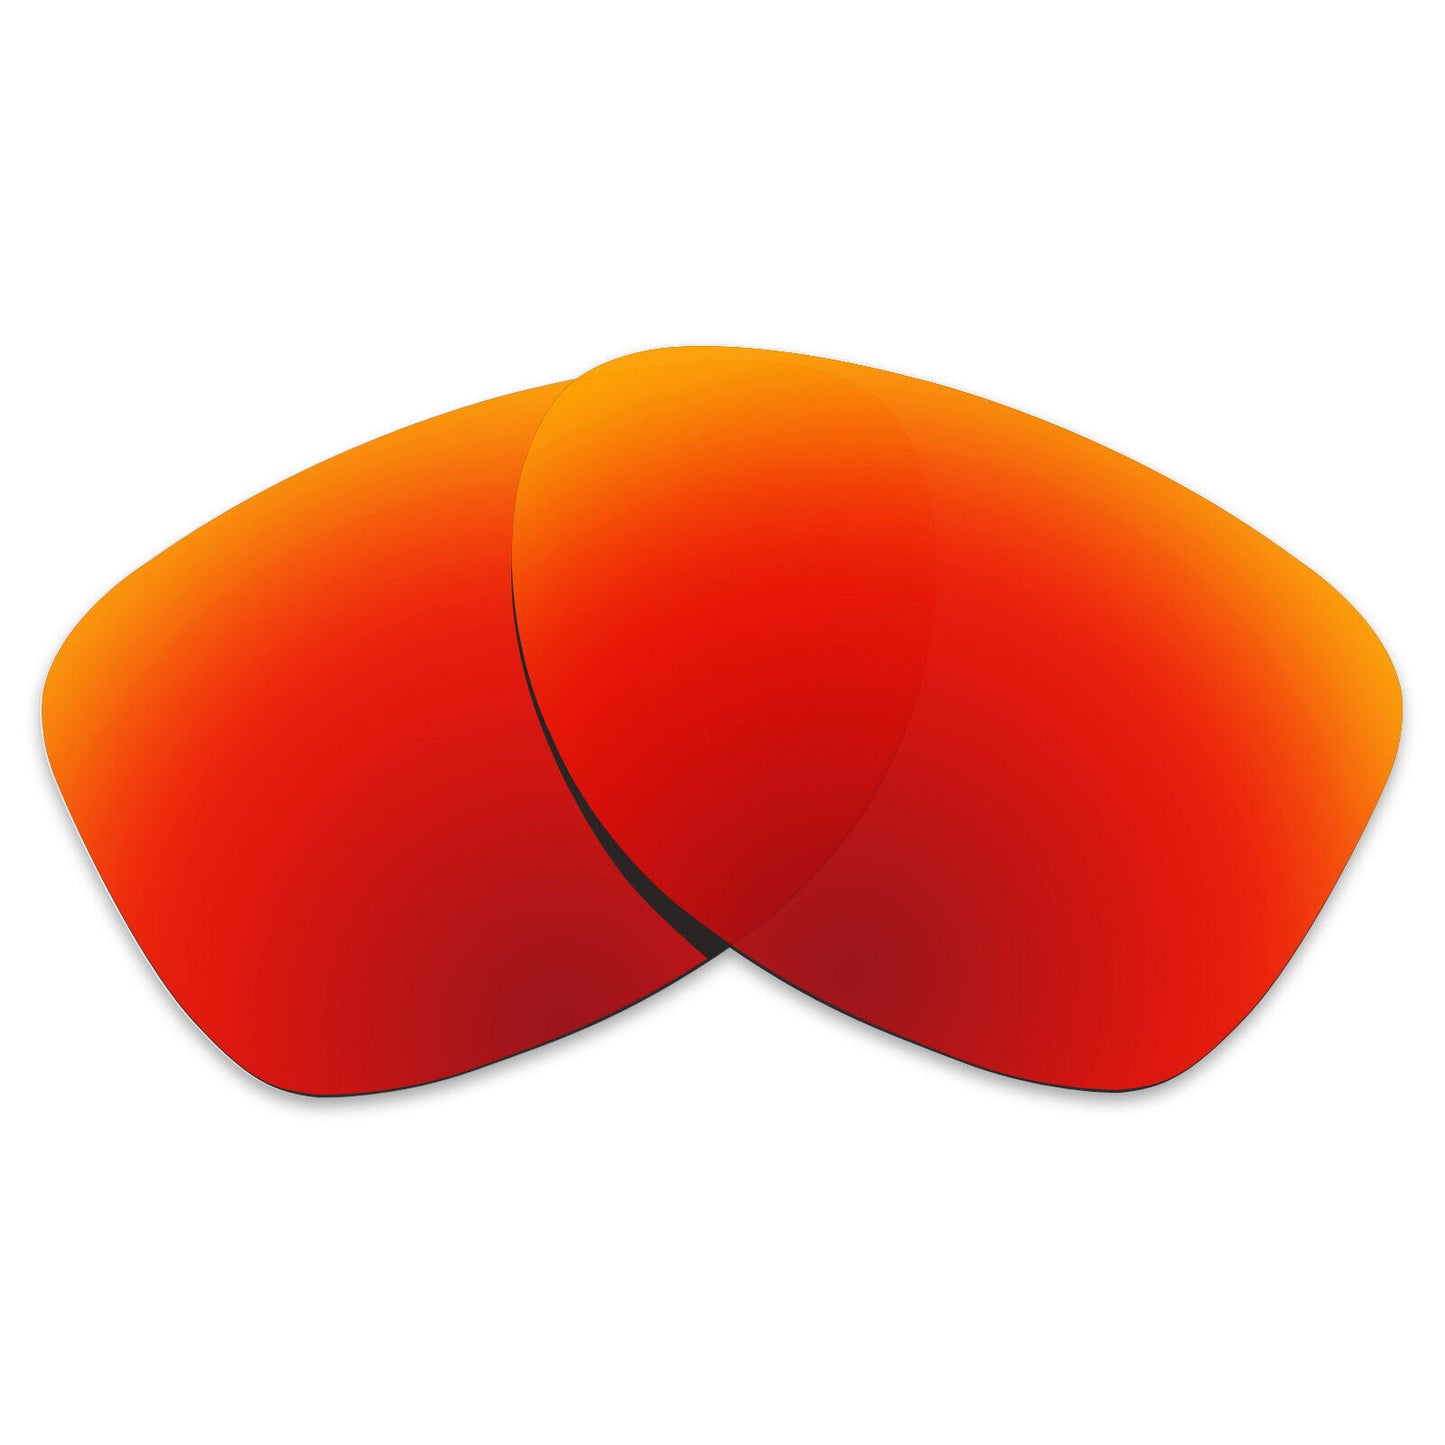 Hawkry Polycarbonate Replacement Lenses for-Oakley Sunglass Dispatch 2-Fire Red